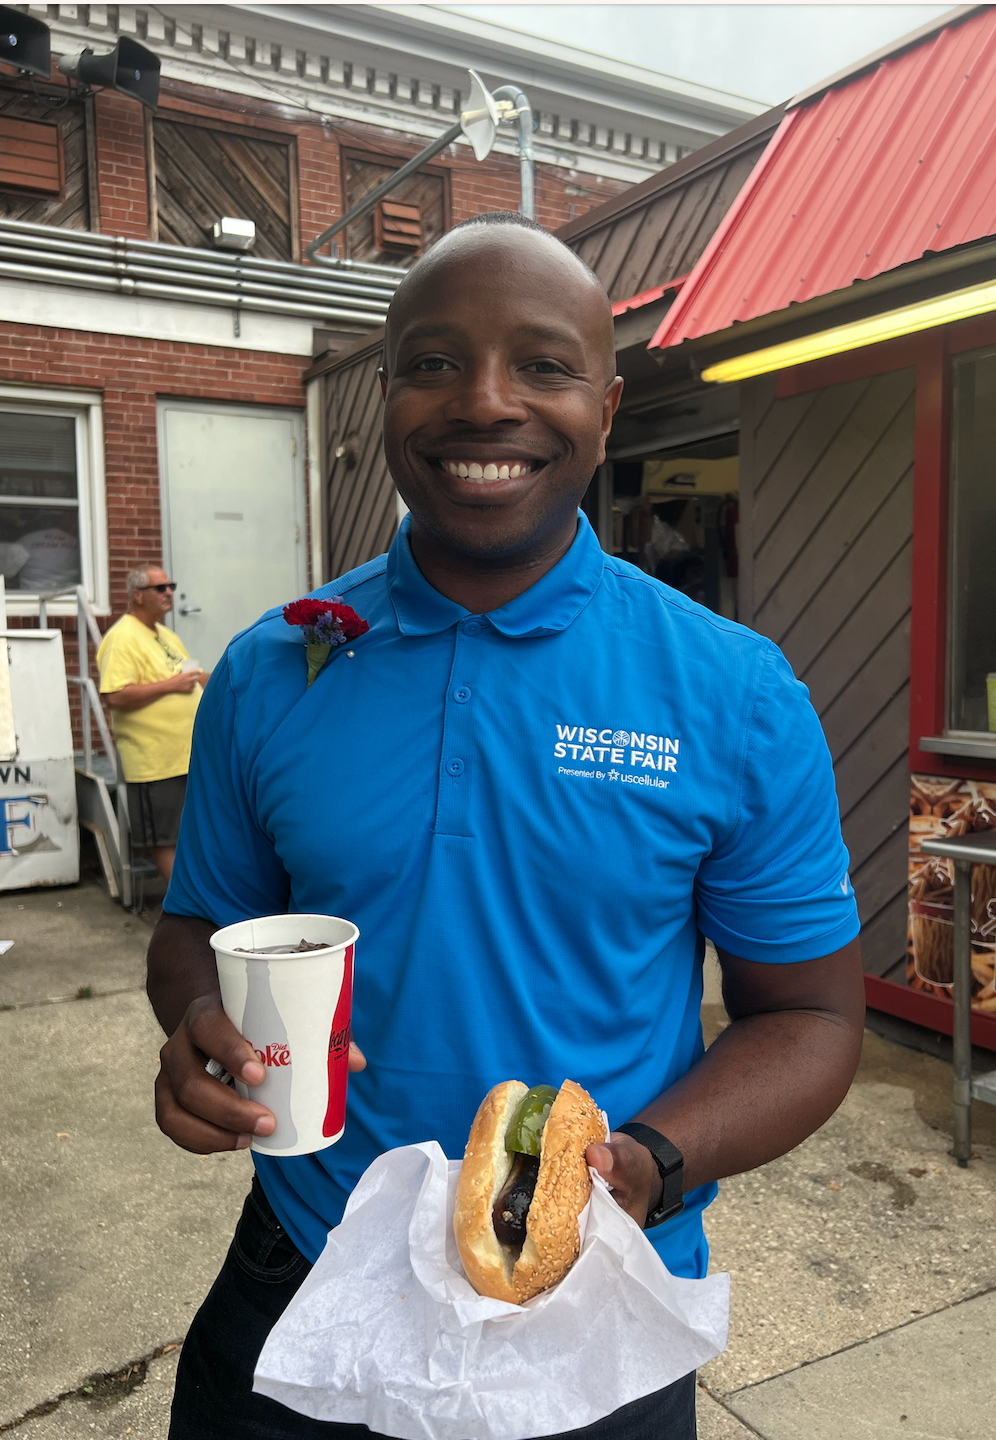 After 93 years, a State Fair sausage staple is selling the family business